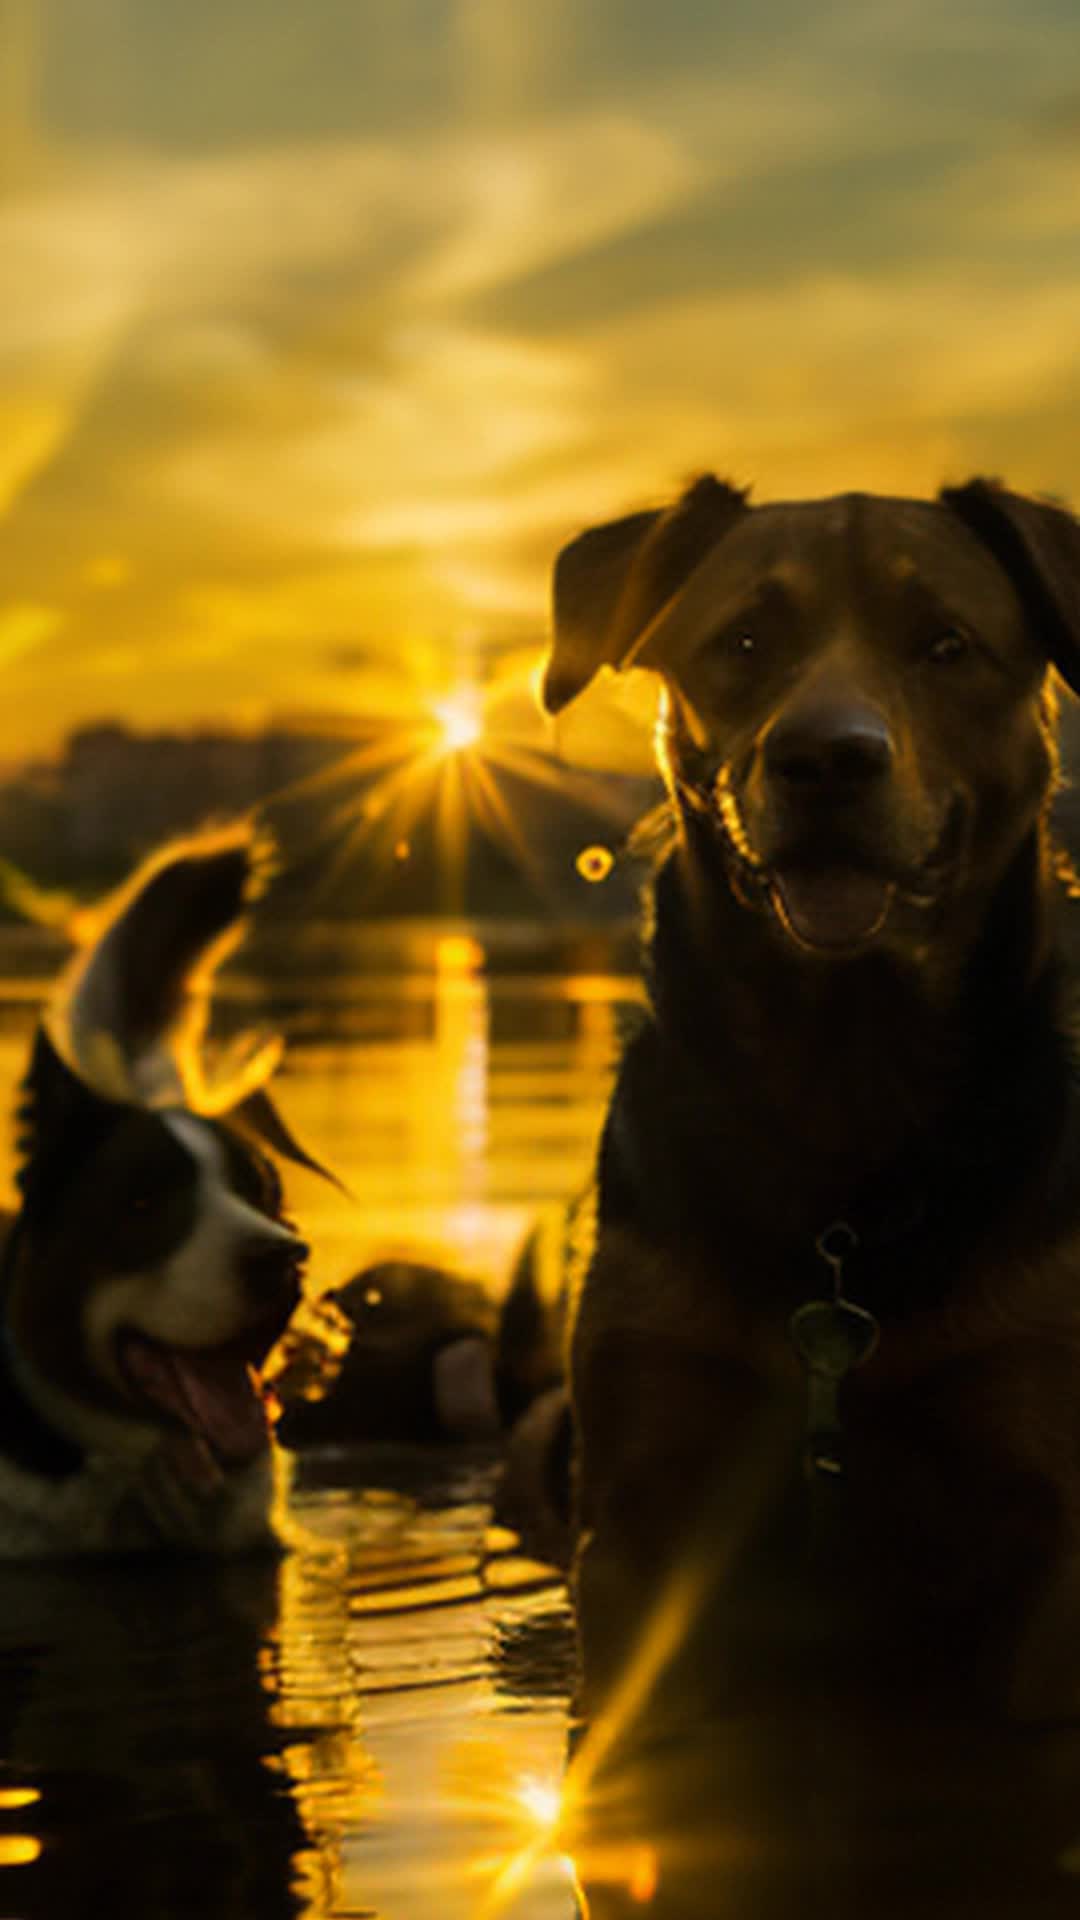 Riverside leisure, Julia catching beer can with grin, Max throwing, dynamic Labrador dodge, warm sunset ambiance, vibrant riverside reunion, soft sunlight casting golden hues, detailed textures, reflection on rippling water